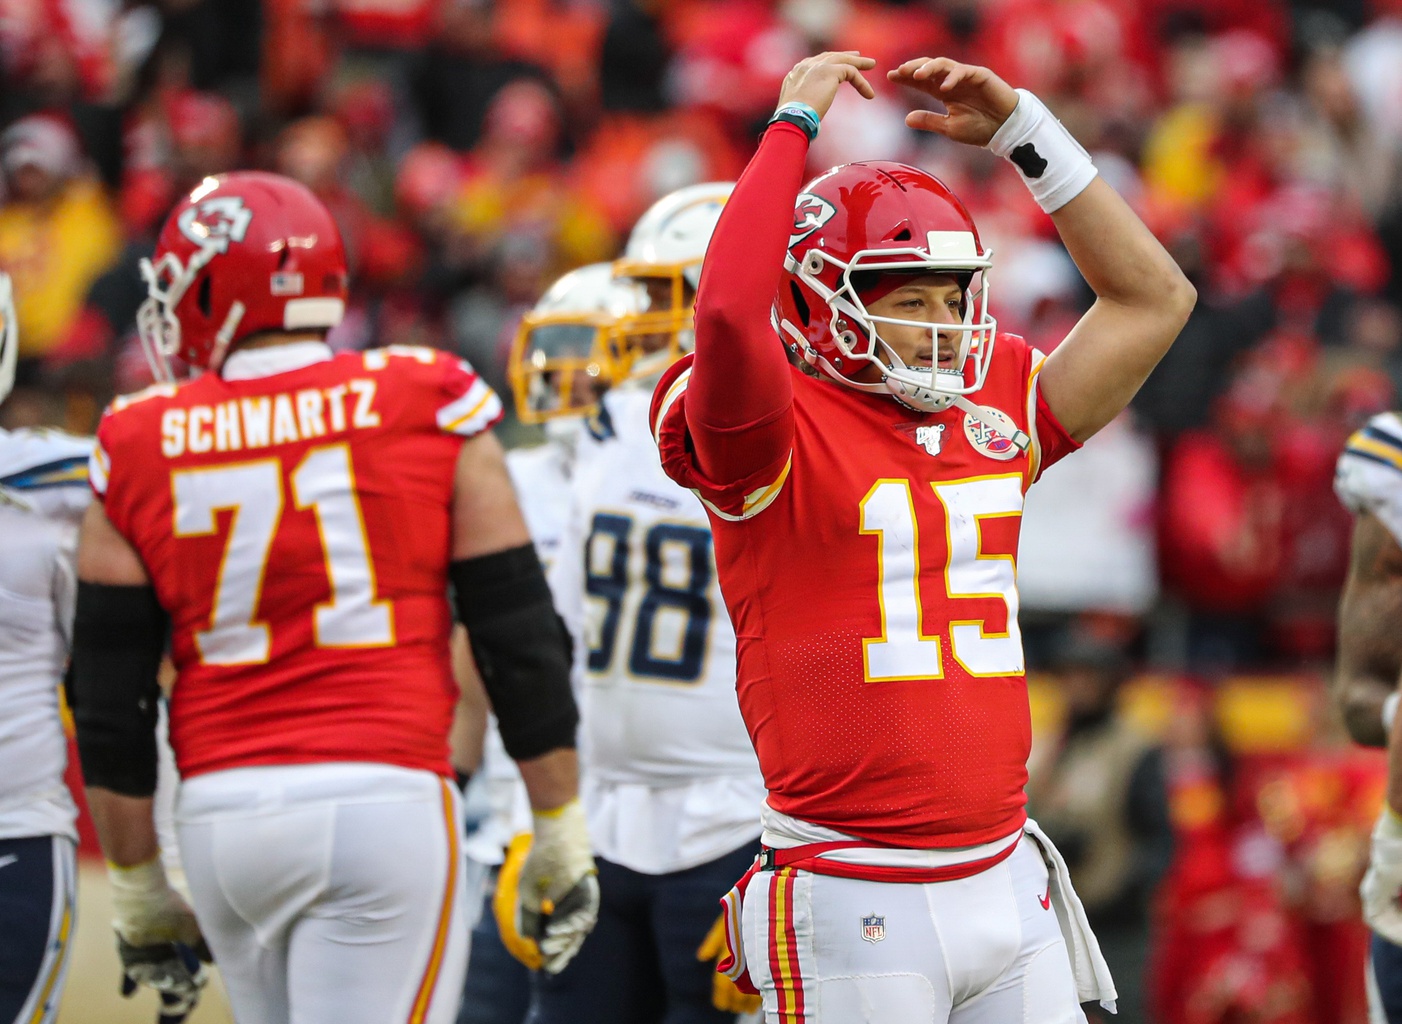 Report: Patrick Mahomes expected to land contract extension this offseason